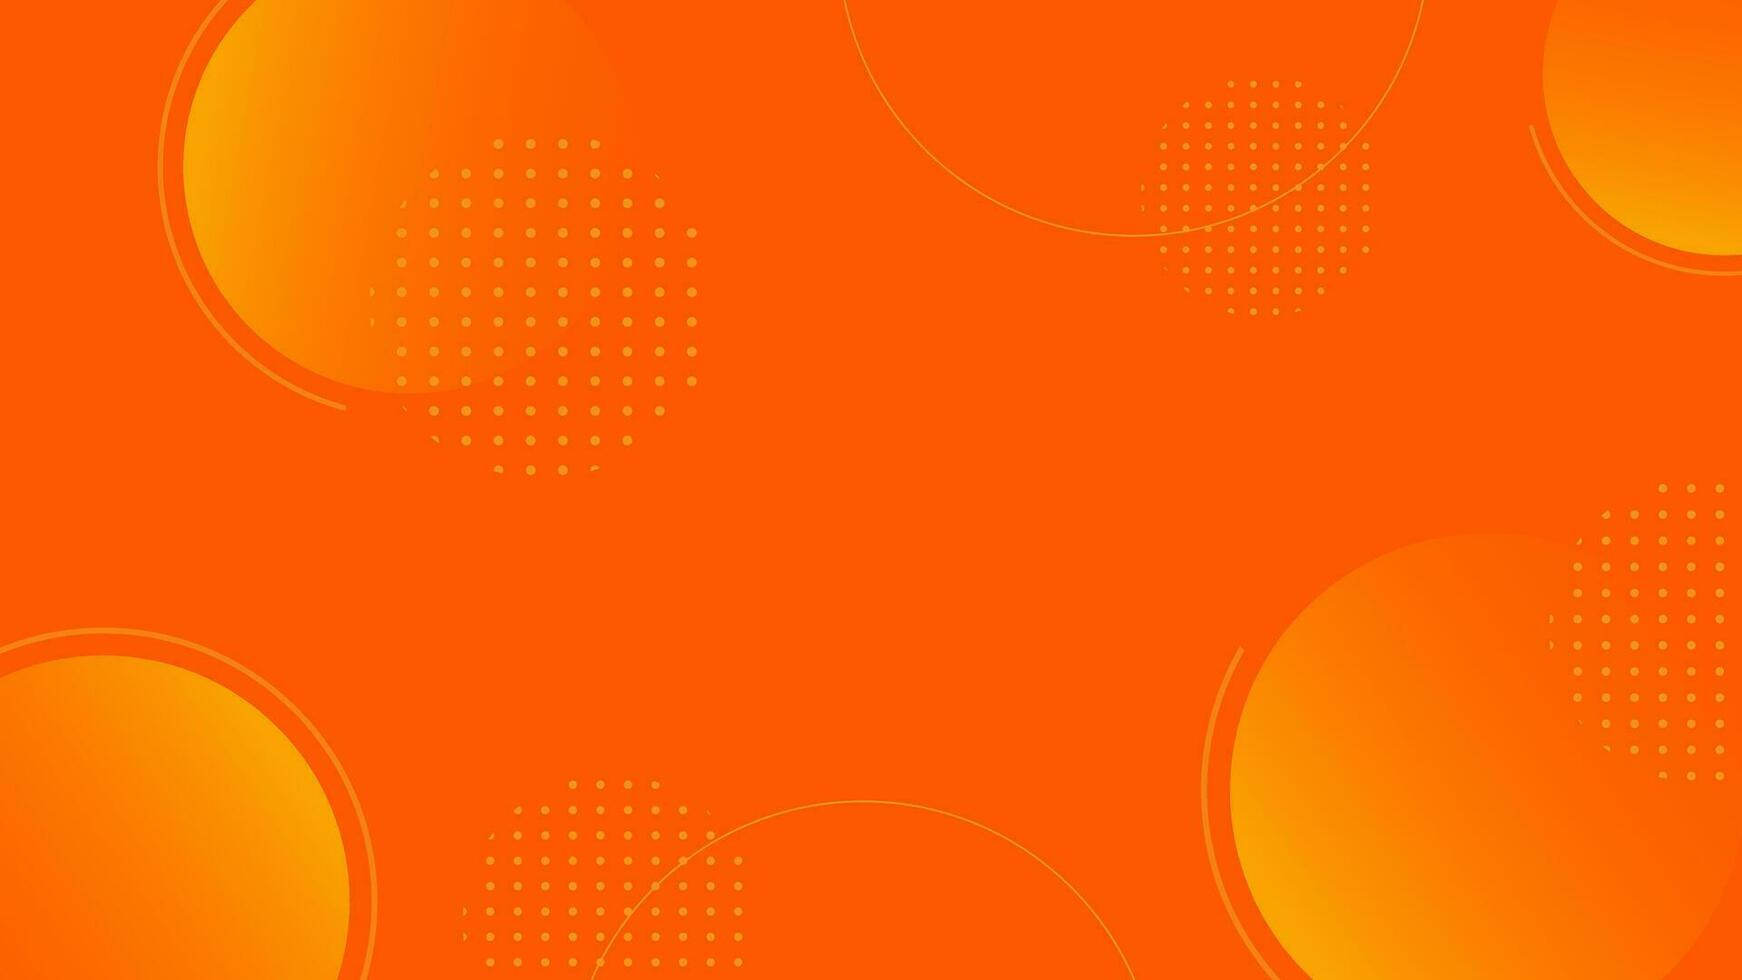 Simple abstract colorful orange background with a circle shape. Suitable for businesses selling banners, events, templates, pages, and others vector